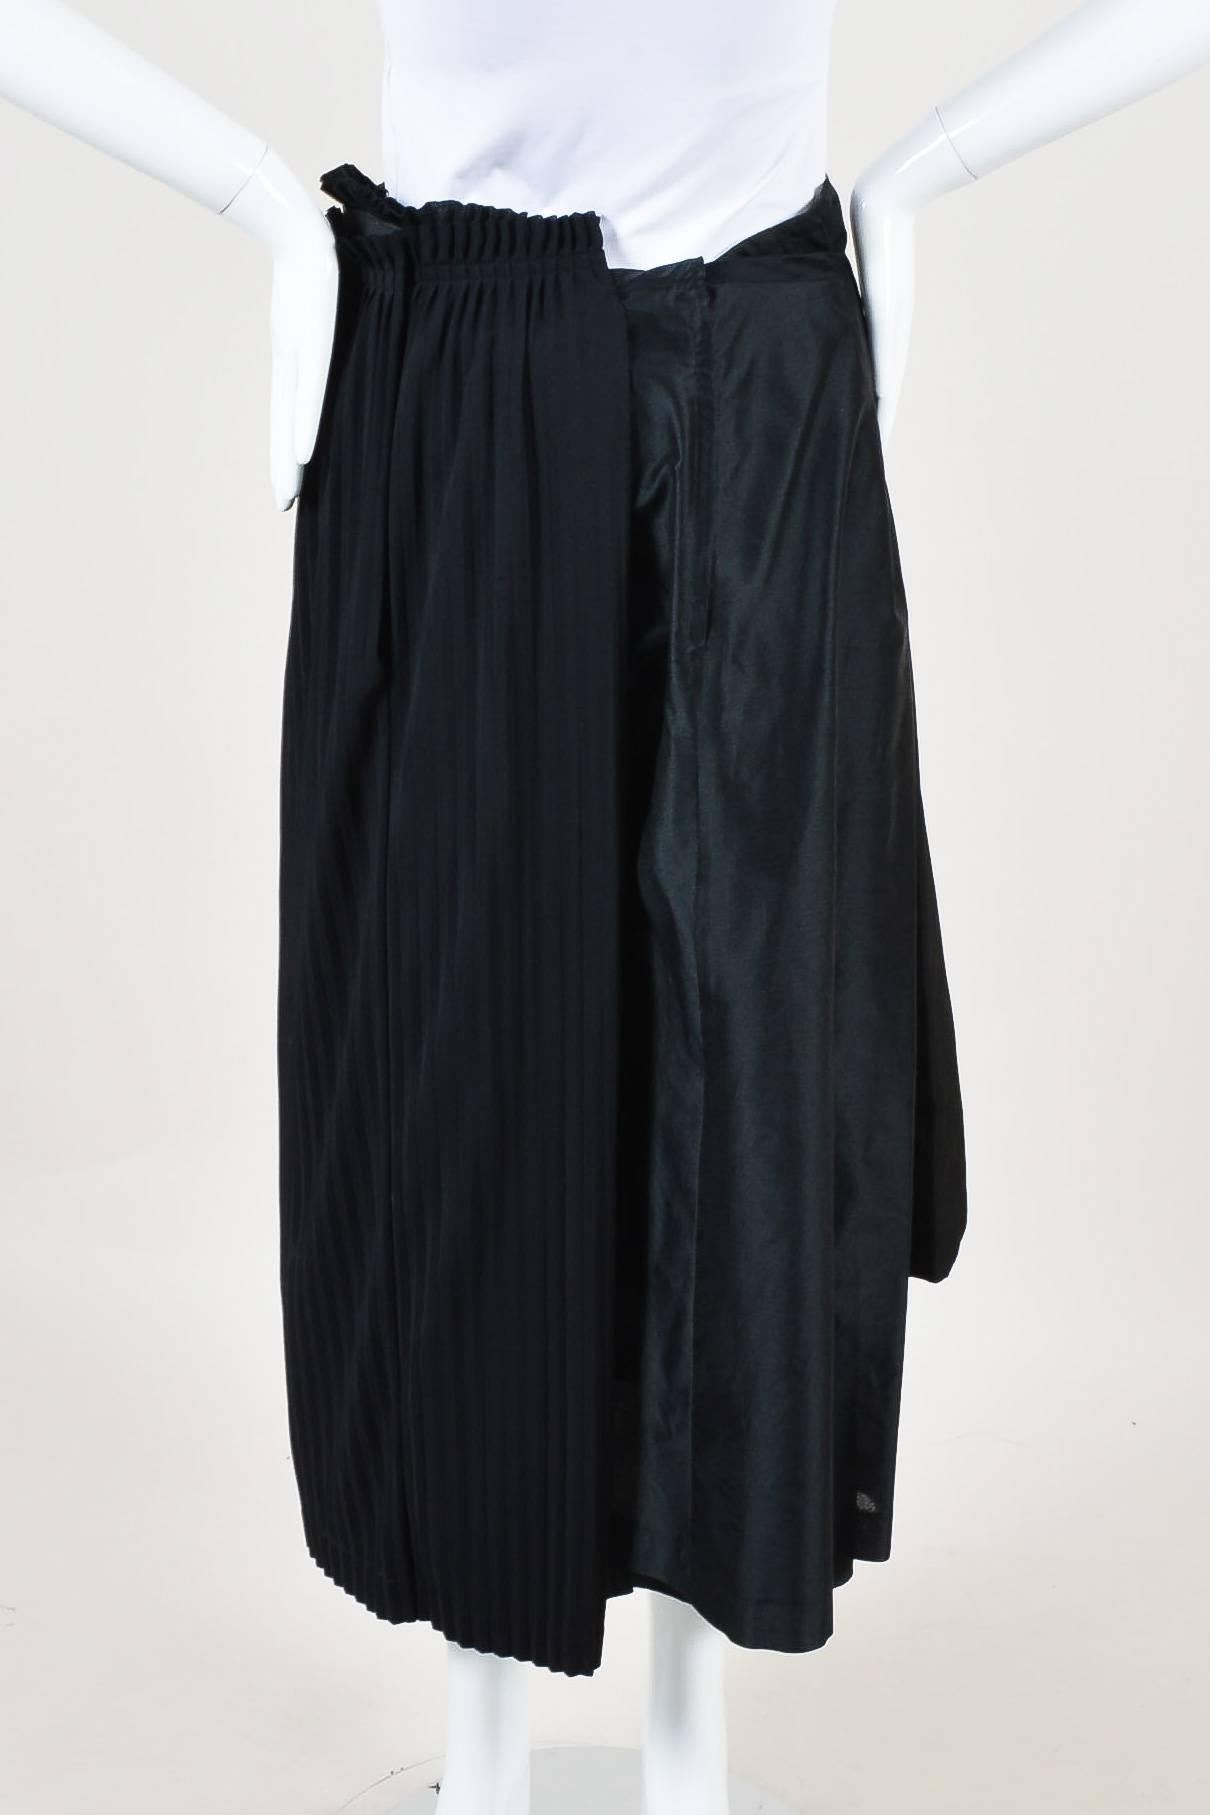 Comme des Garcons Black Silk Blend Pleated Panel Asymmetrical Skirt In Good Condition For Sale In Chicago, IL